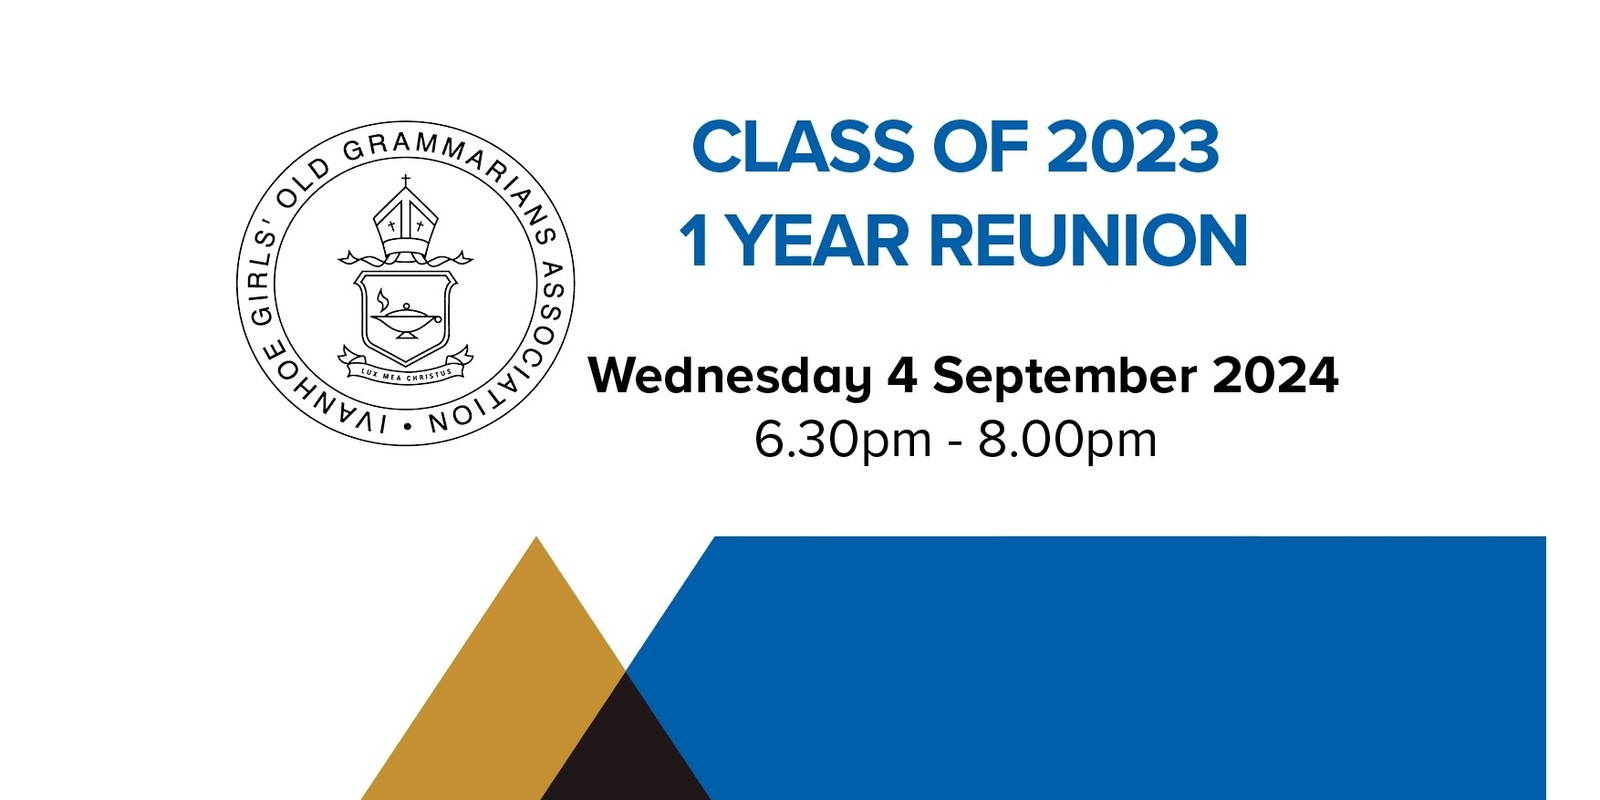 Banner image for Class of 2023 Reunion hosted by IGOGA